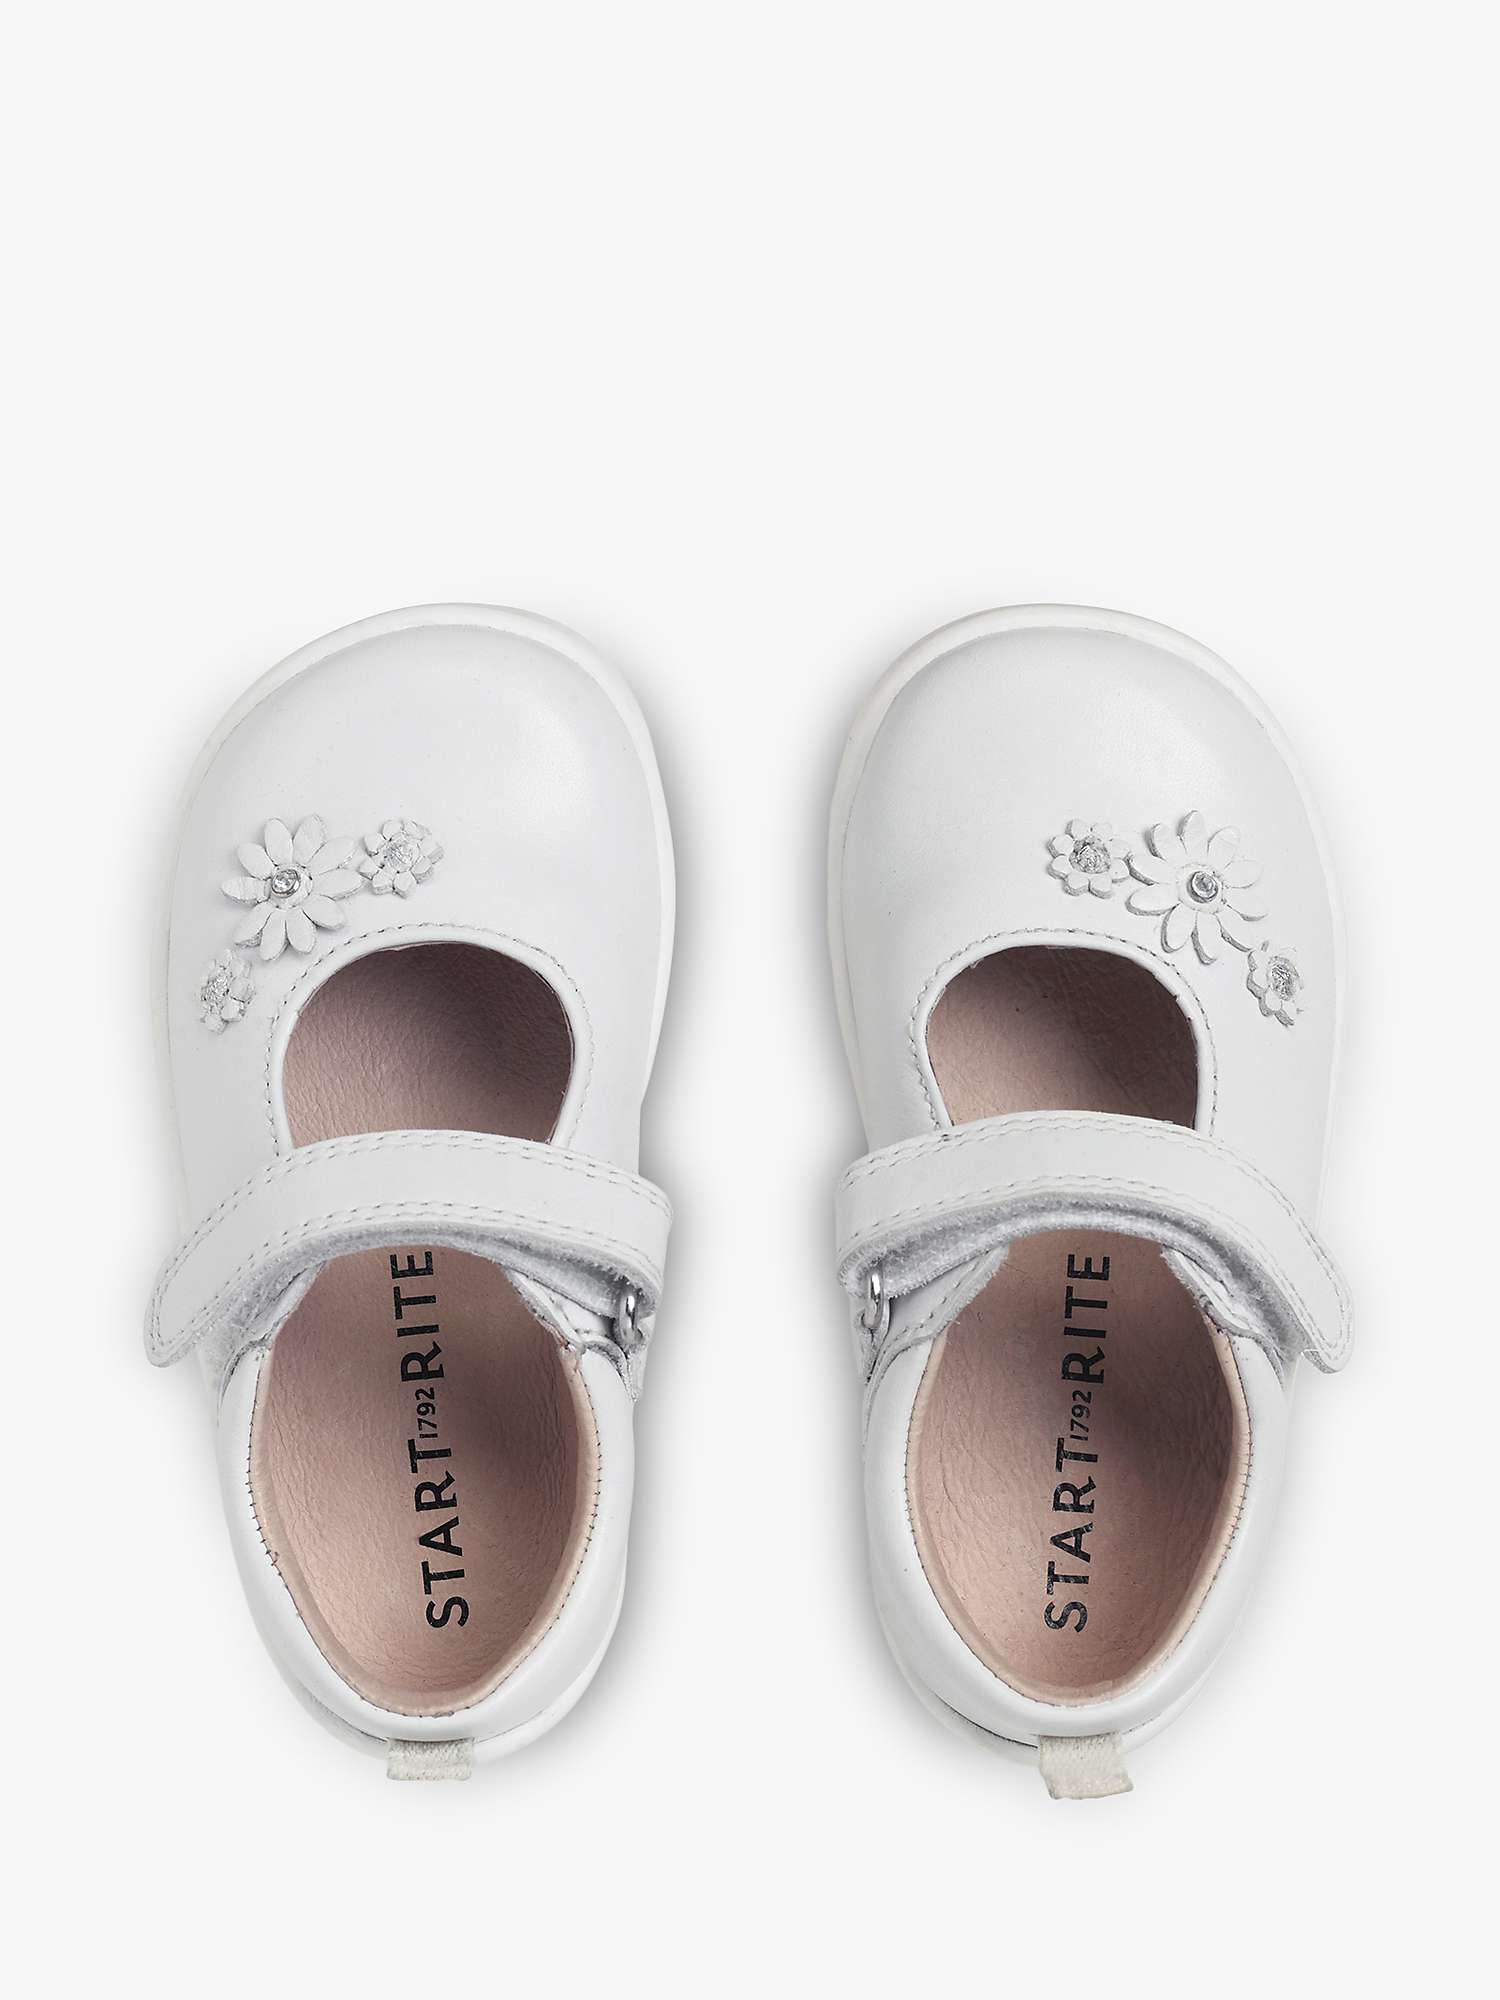 Buy Start-Rite Kids' Leather Fairy Tale First Steps Shoes, White Online at johnlewis.com